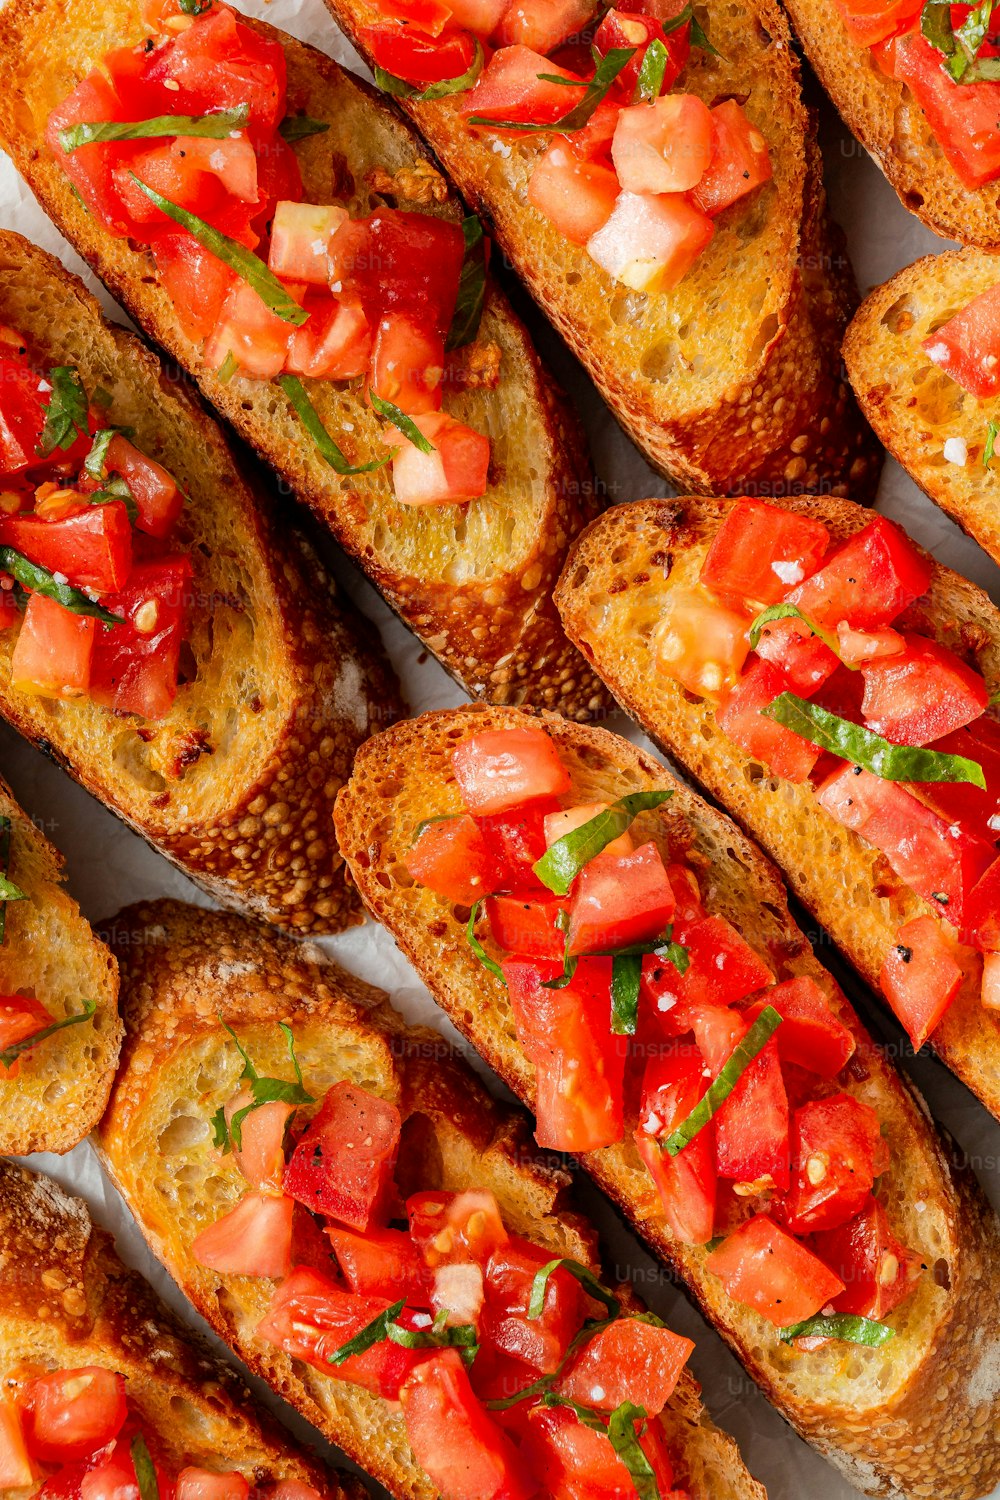 a close up of bread with tomatoes on it